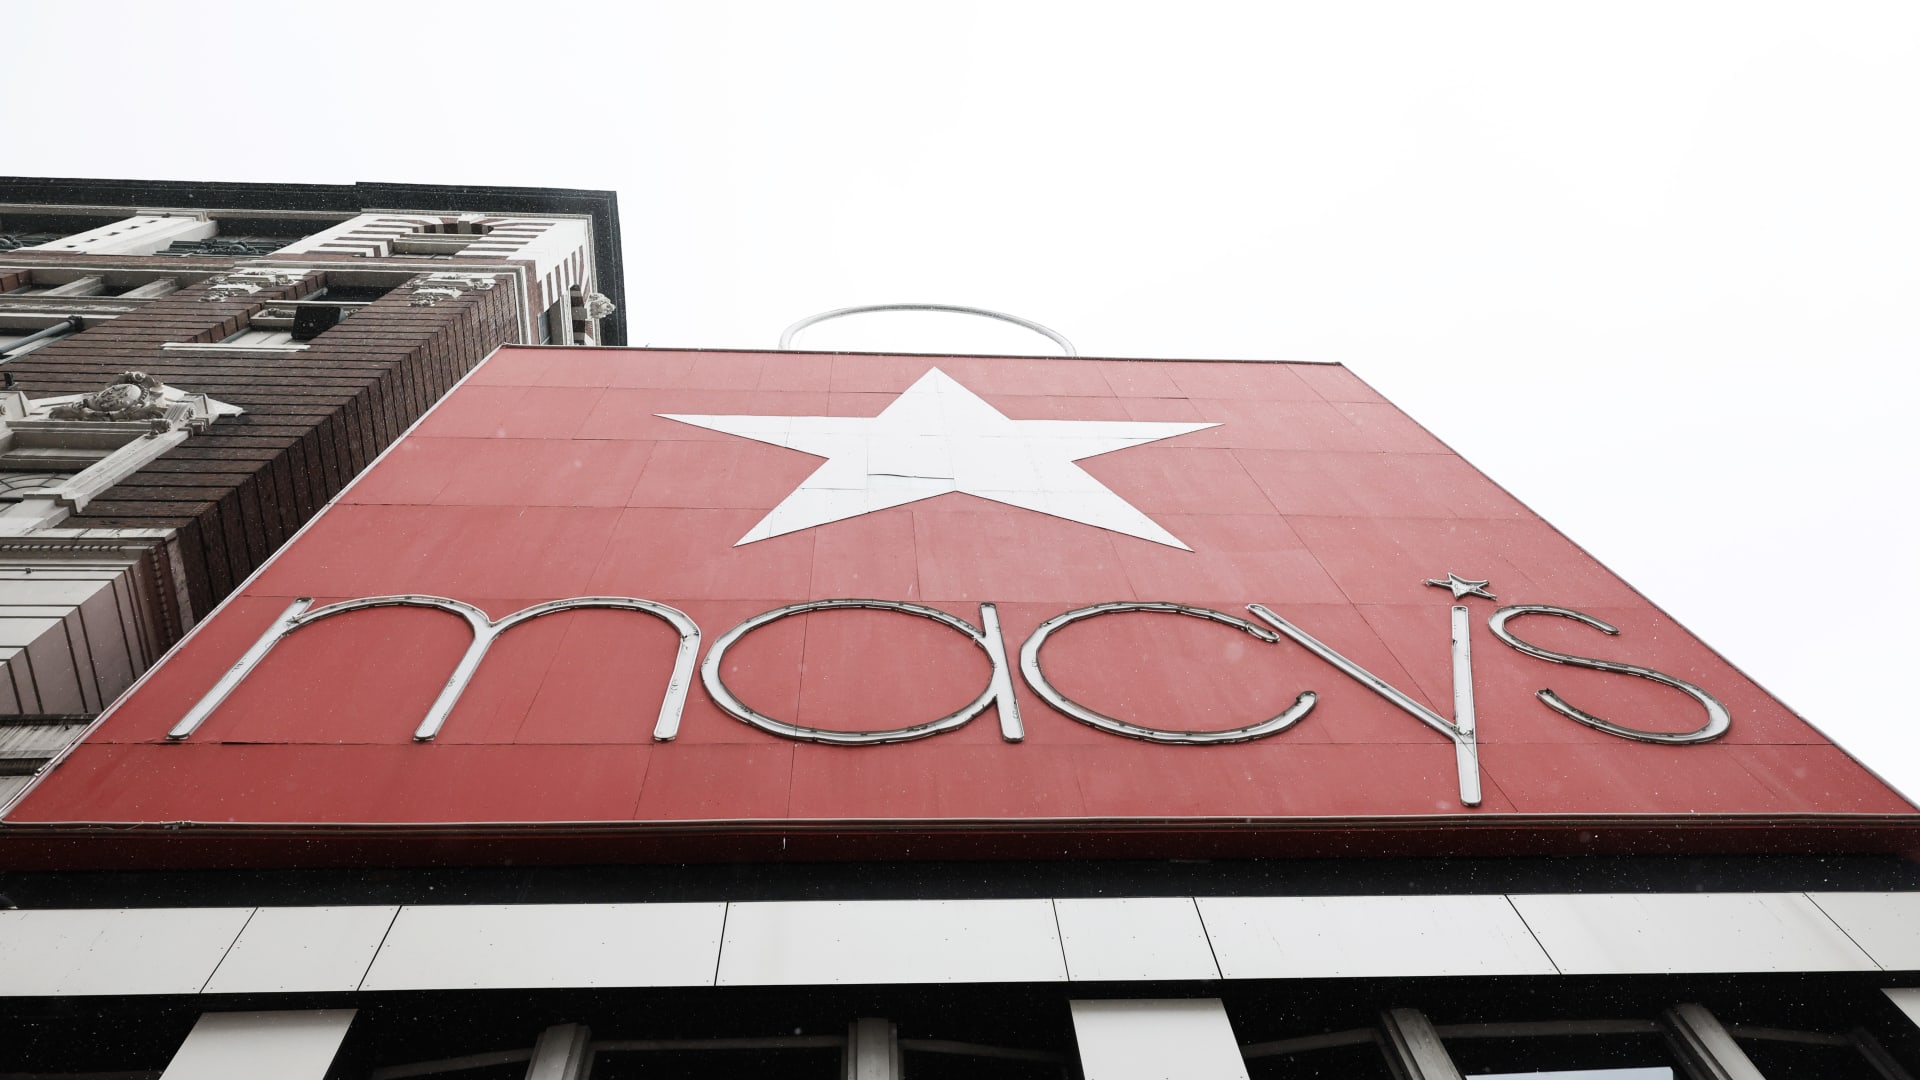 Organized theft ring that targeted Macy's charged in New York